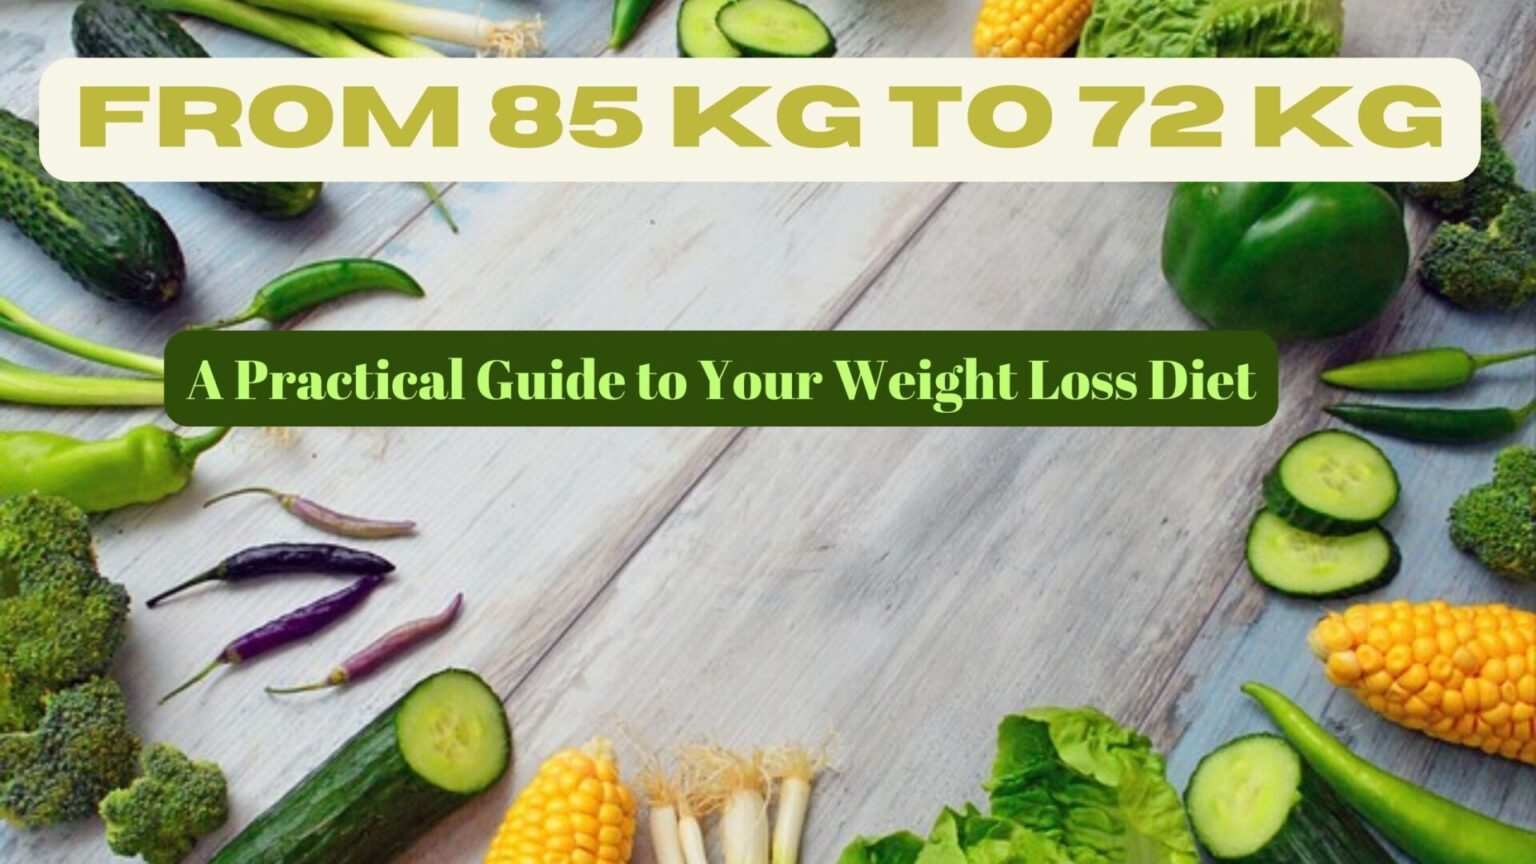 From 85 kg to 72 kg: A Practical Guide to Your Weight Loss Diet